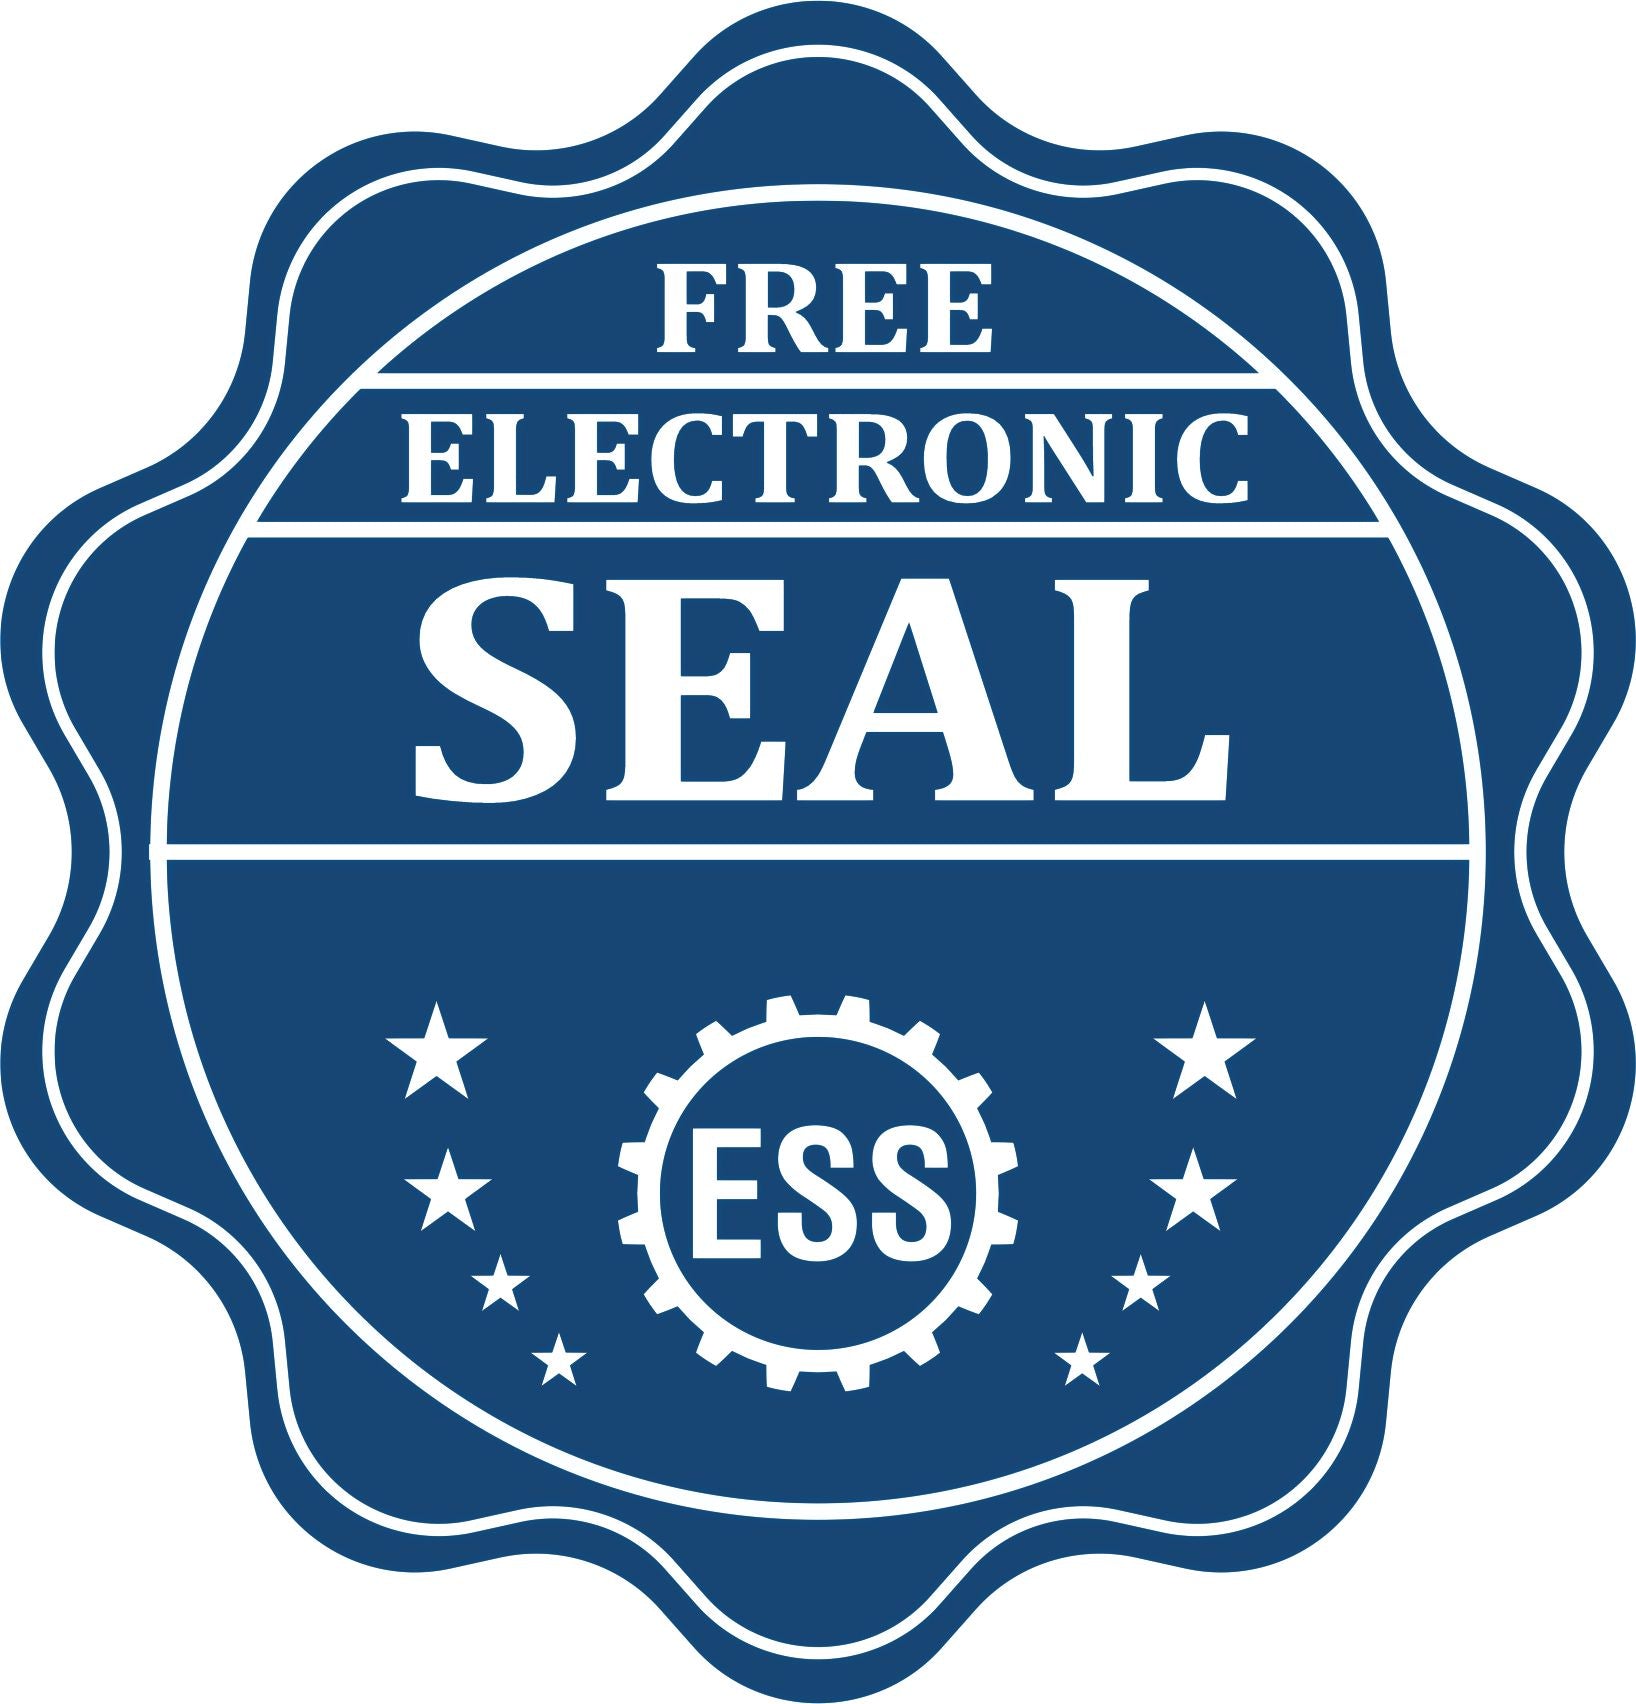 A badge showing a free electronic seal for the Handheld Louisiana Professional Engineer Embosser with stars and the ESS gear on the emblem.